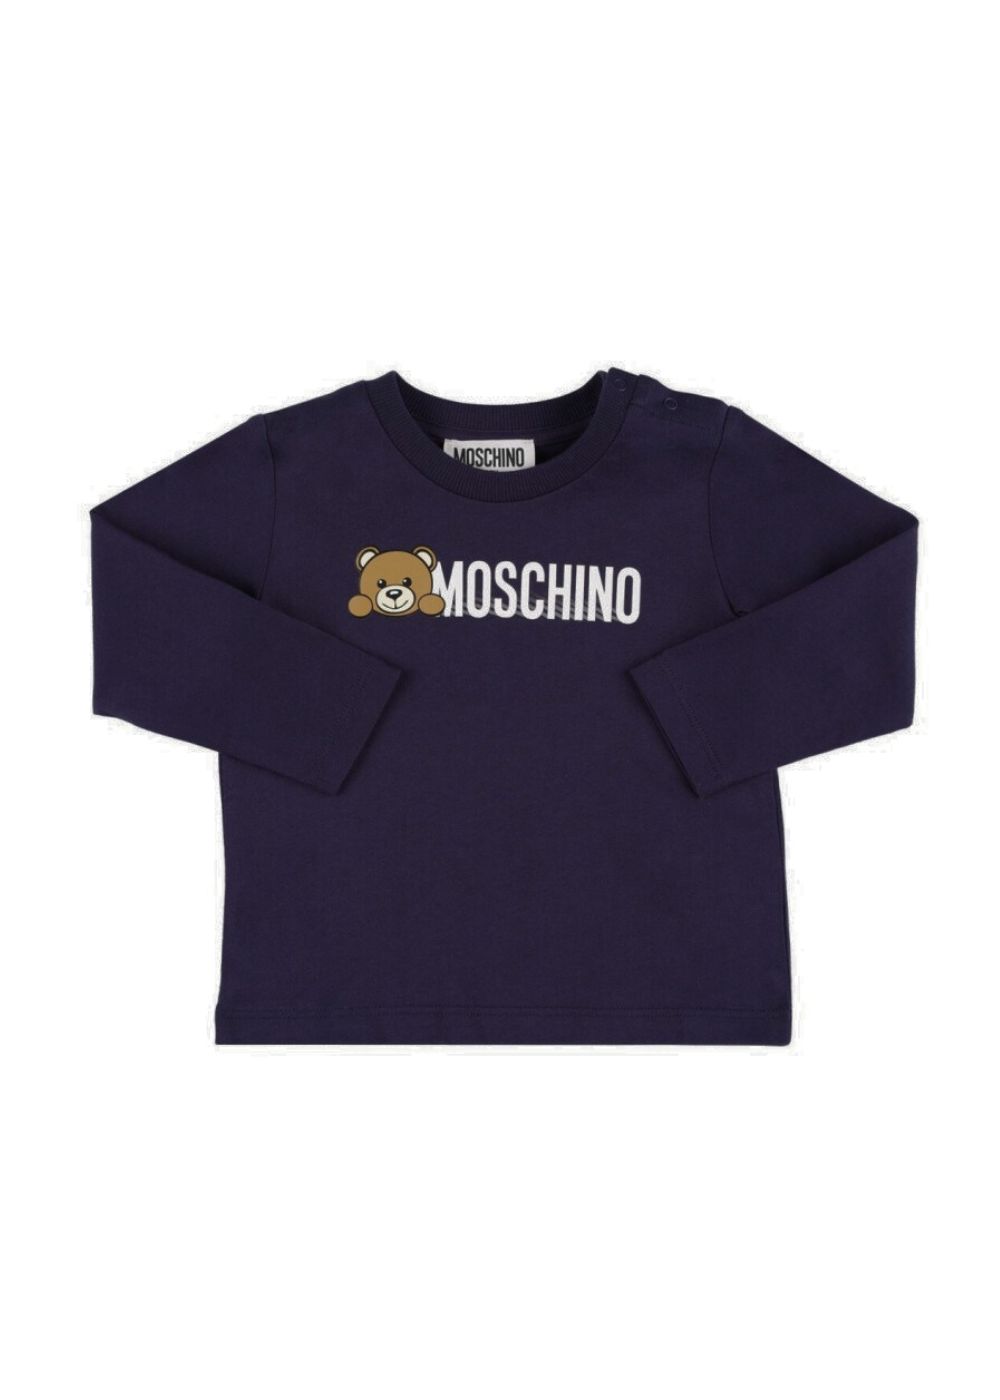 Featured image for “Moschino T-Shirt con Logo”